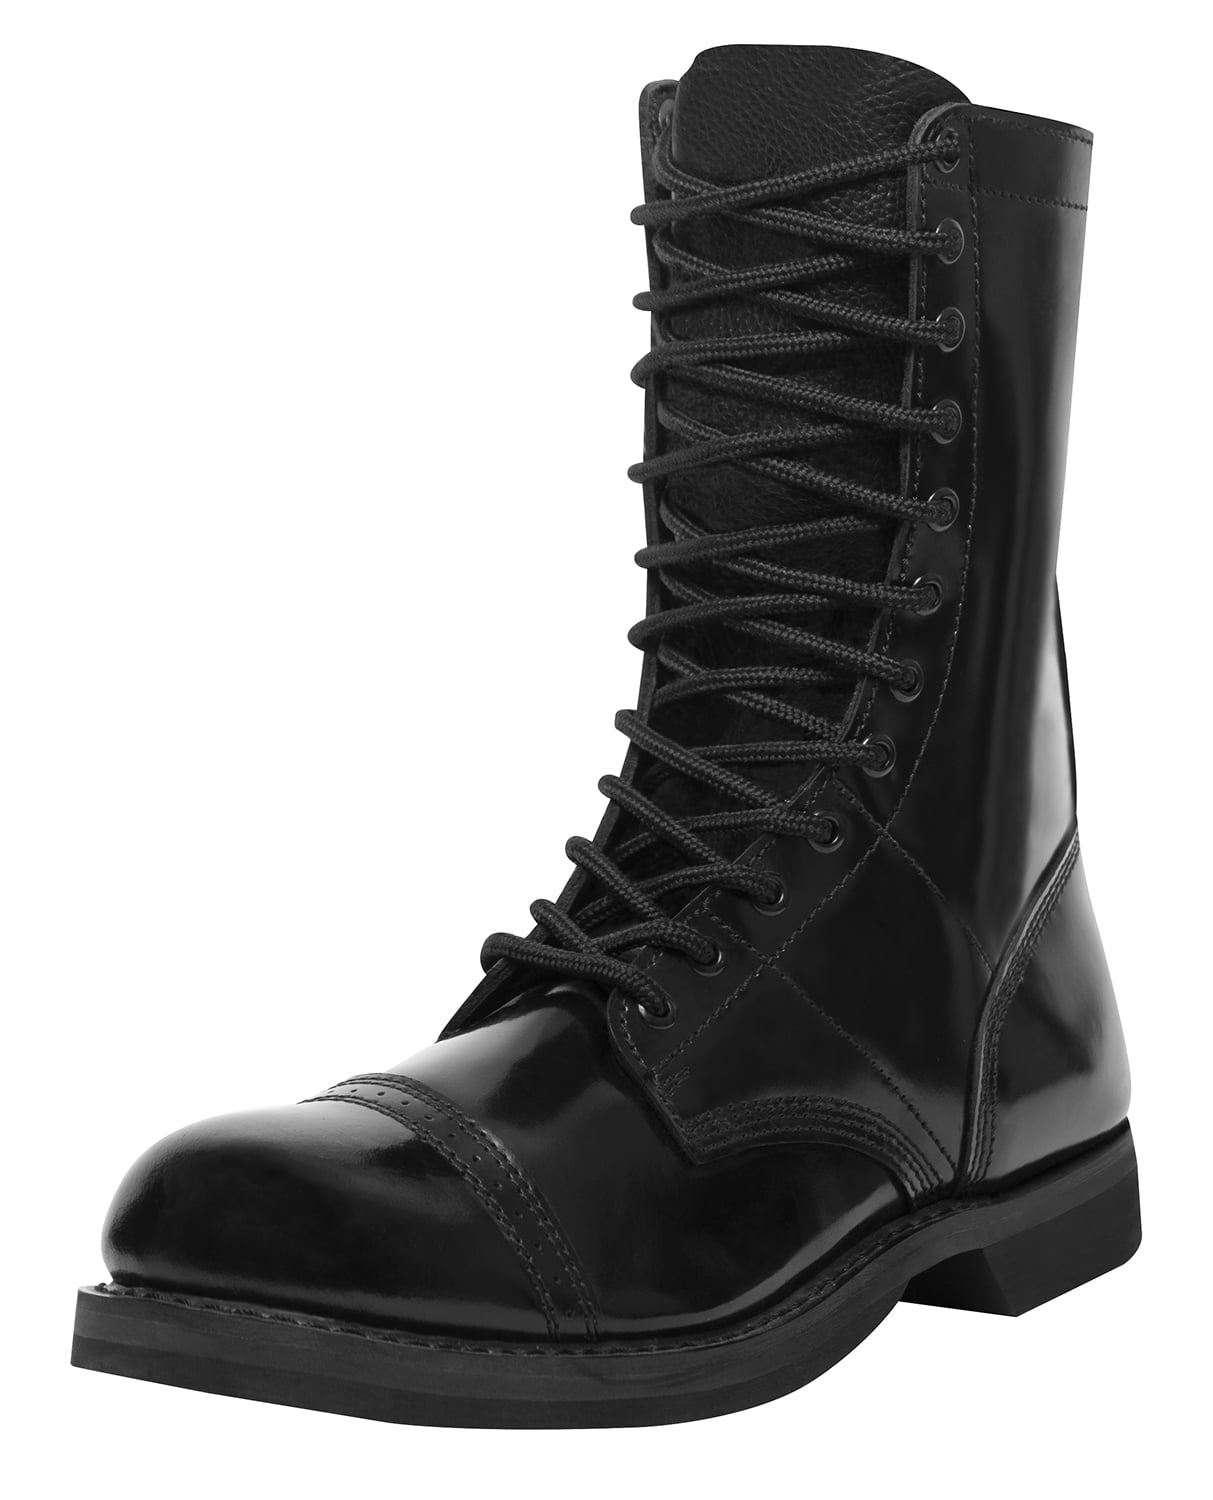 Rothco Leather Jump Boot - 10 Inches